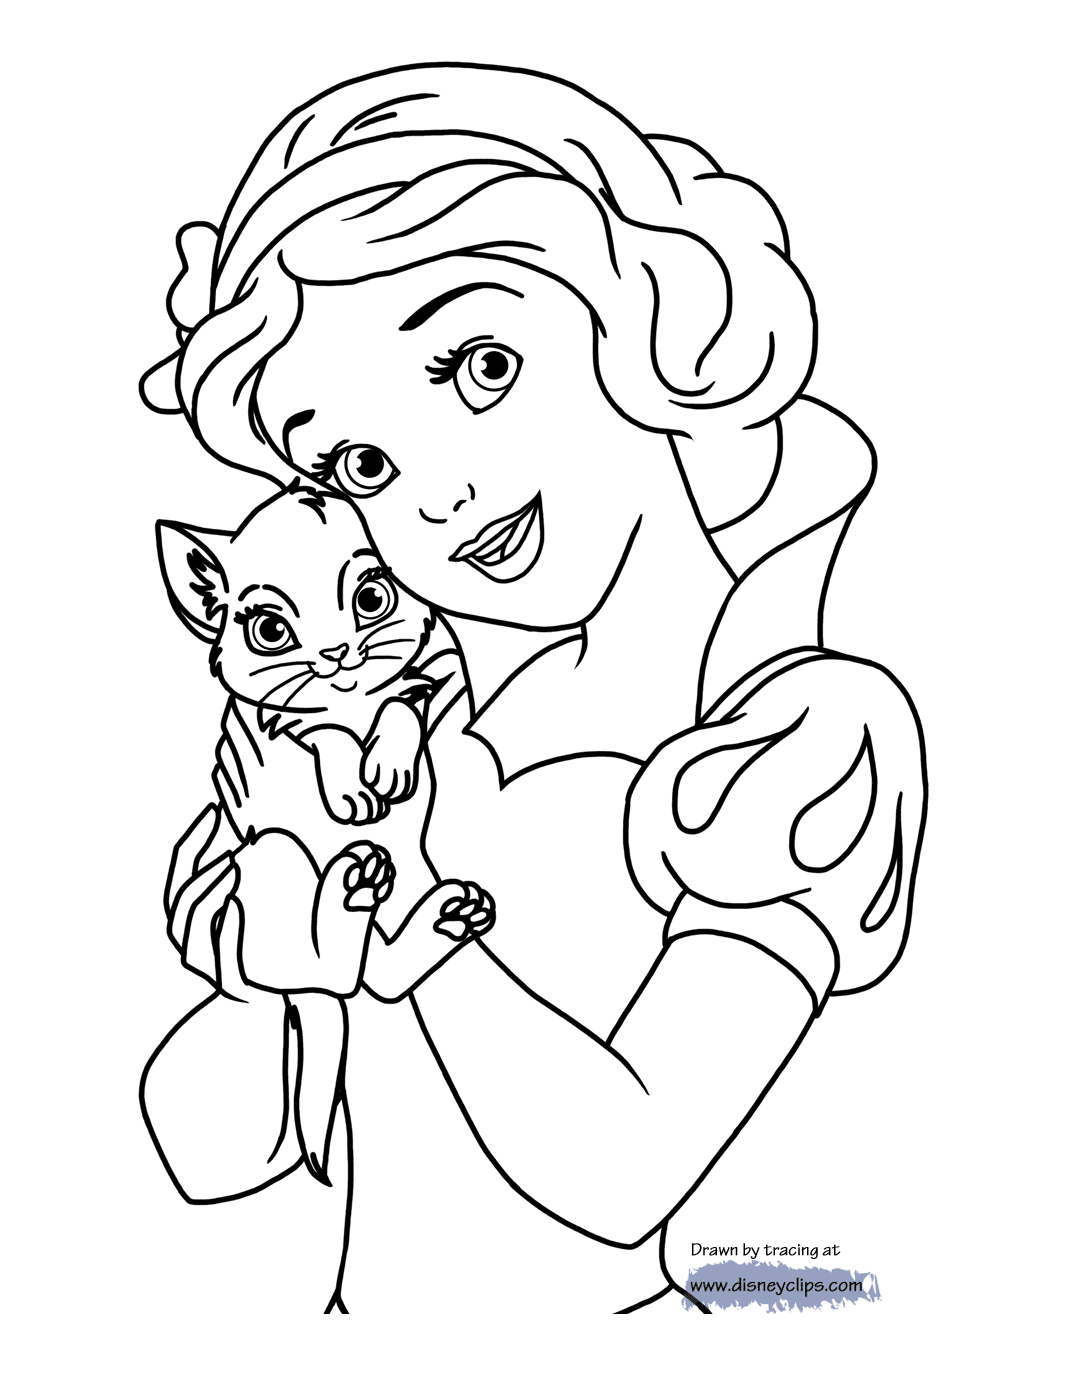 free snow white coloring pages snow white coloring pages from disney princess cartoon coloring pages free white snow 